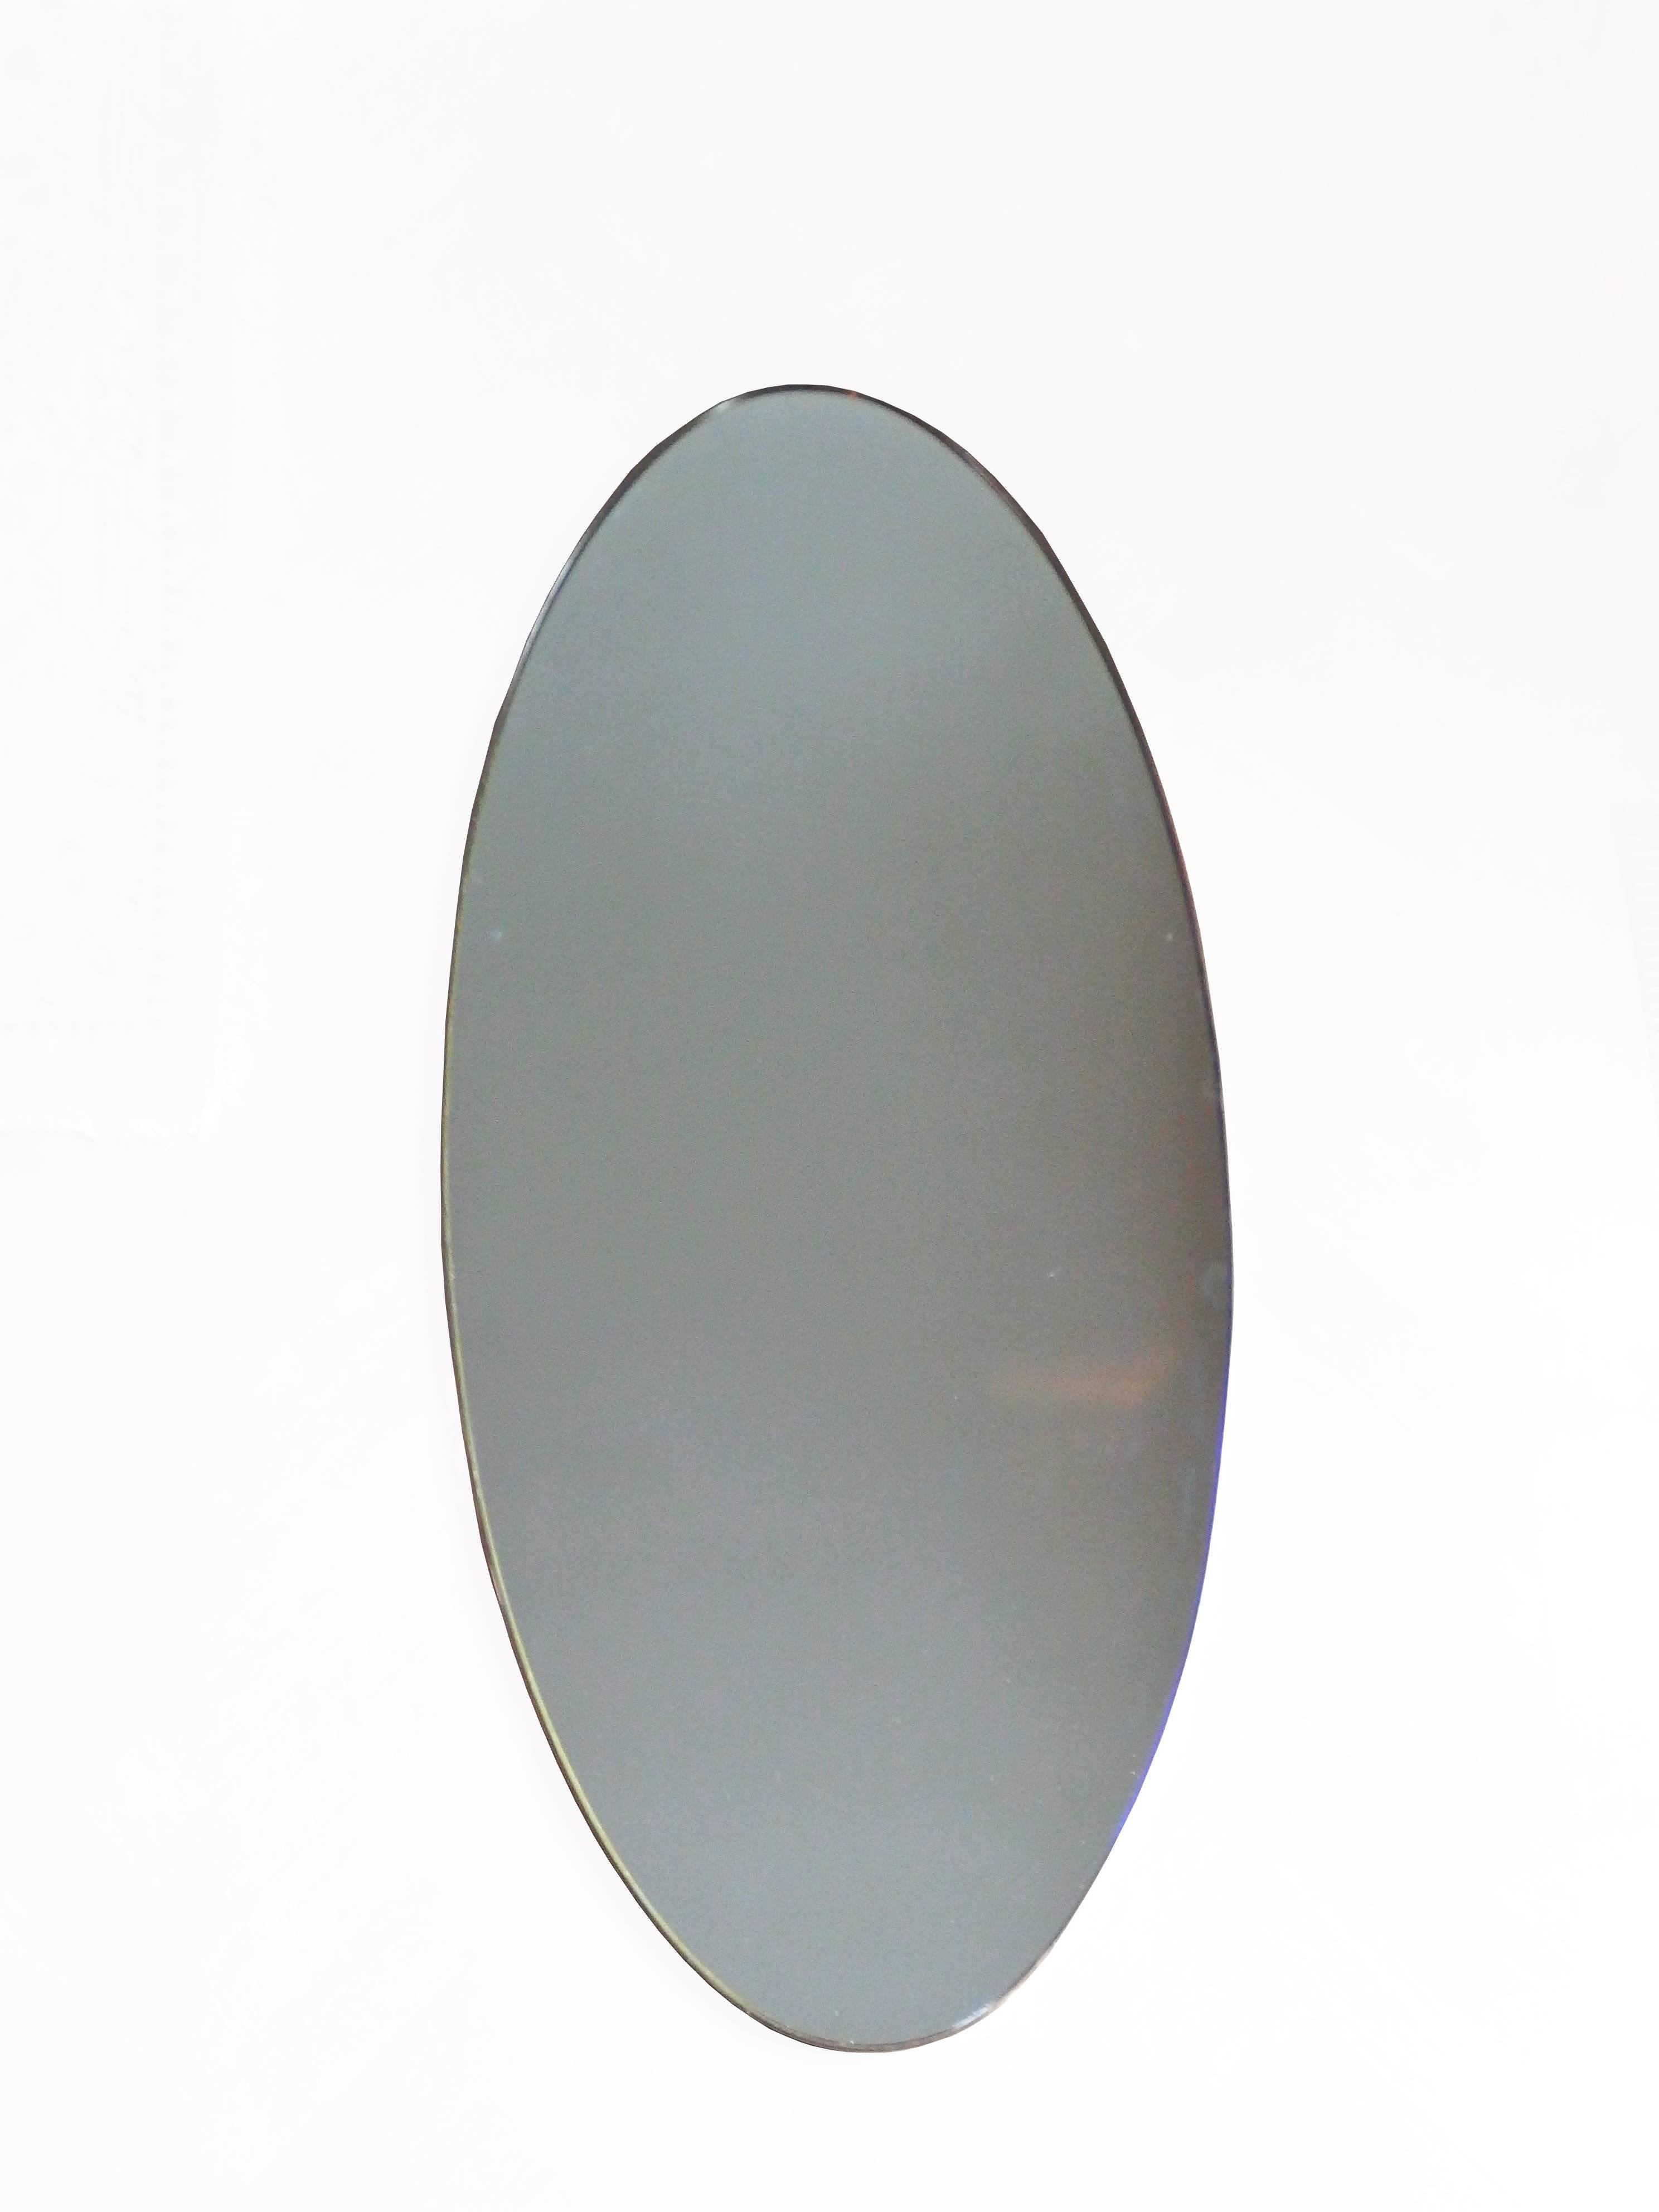 Large pair of Italian oval mirrors in a brass frame from the 1950s.